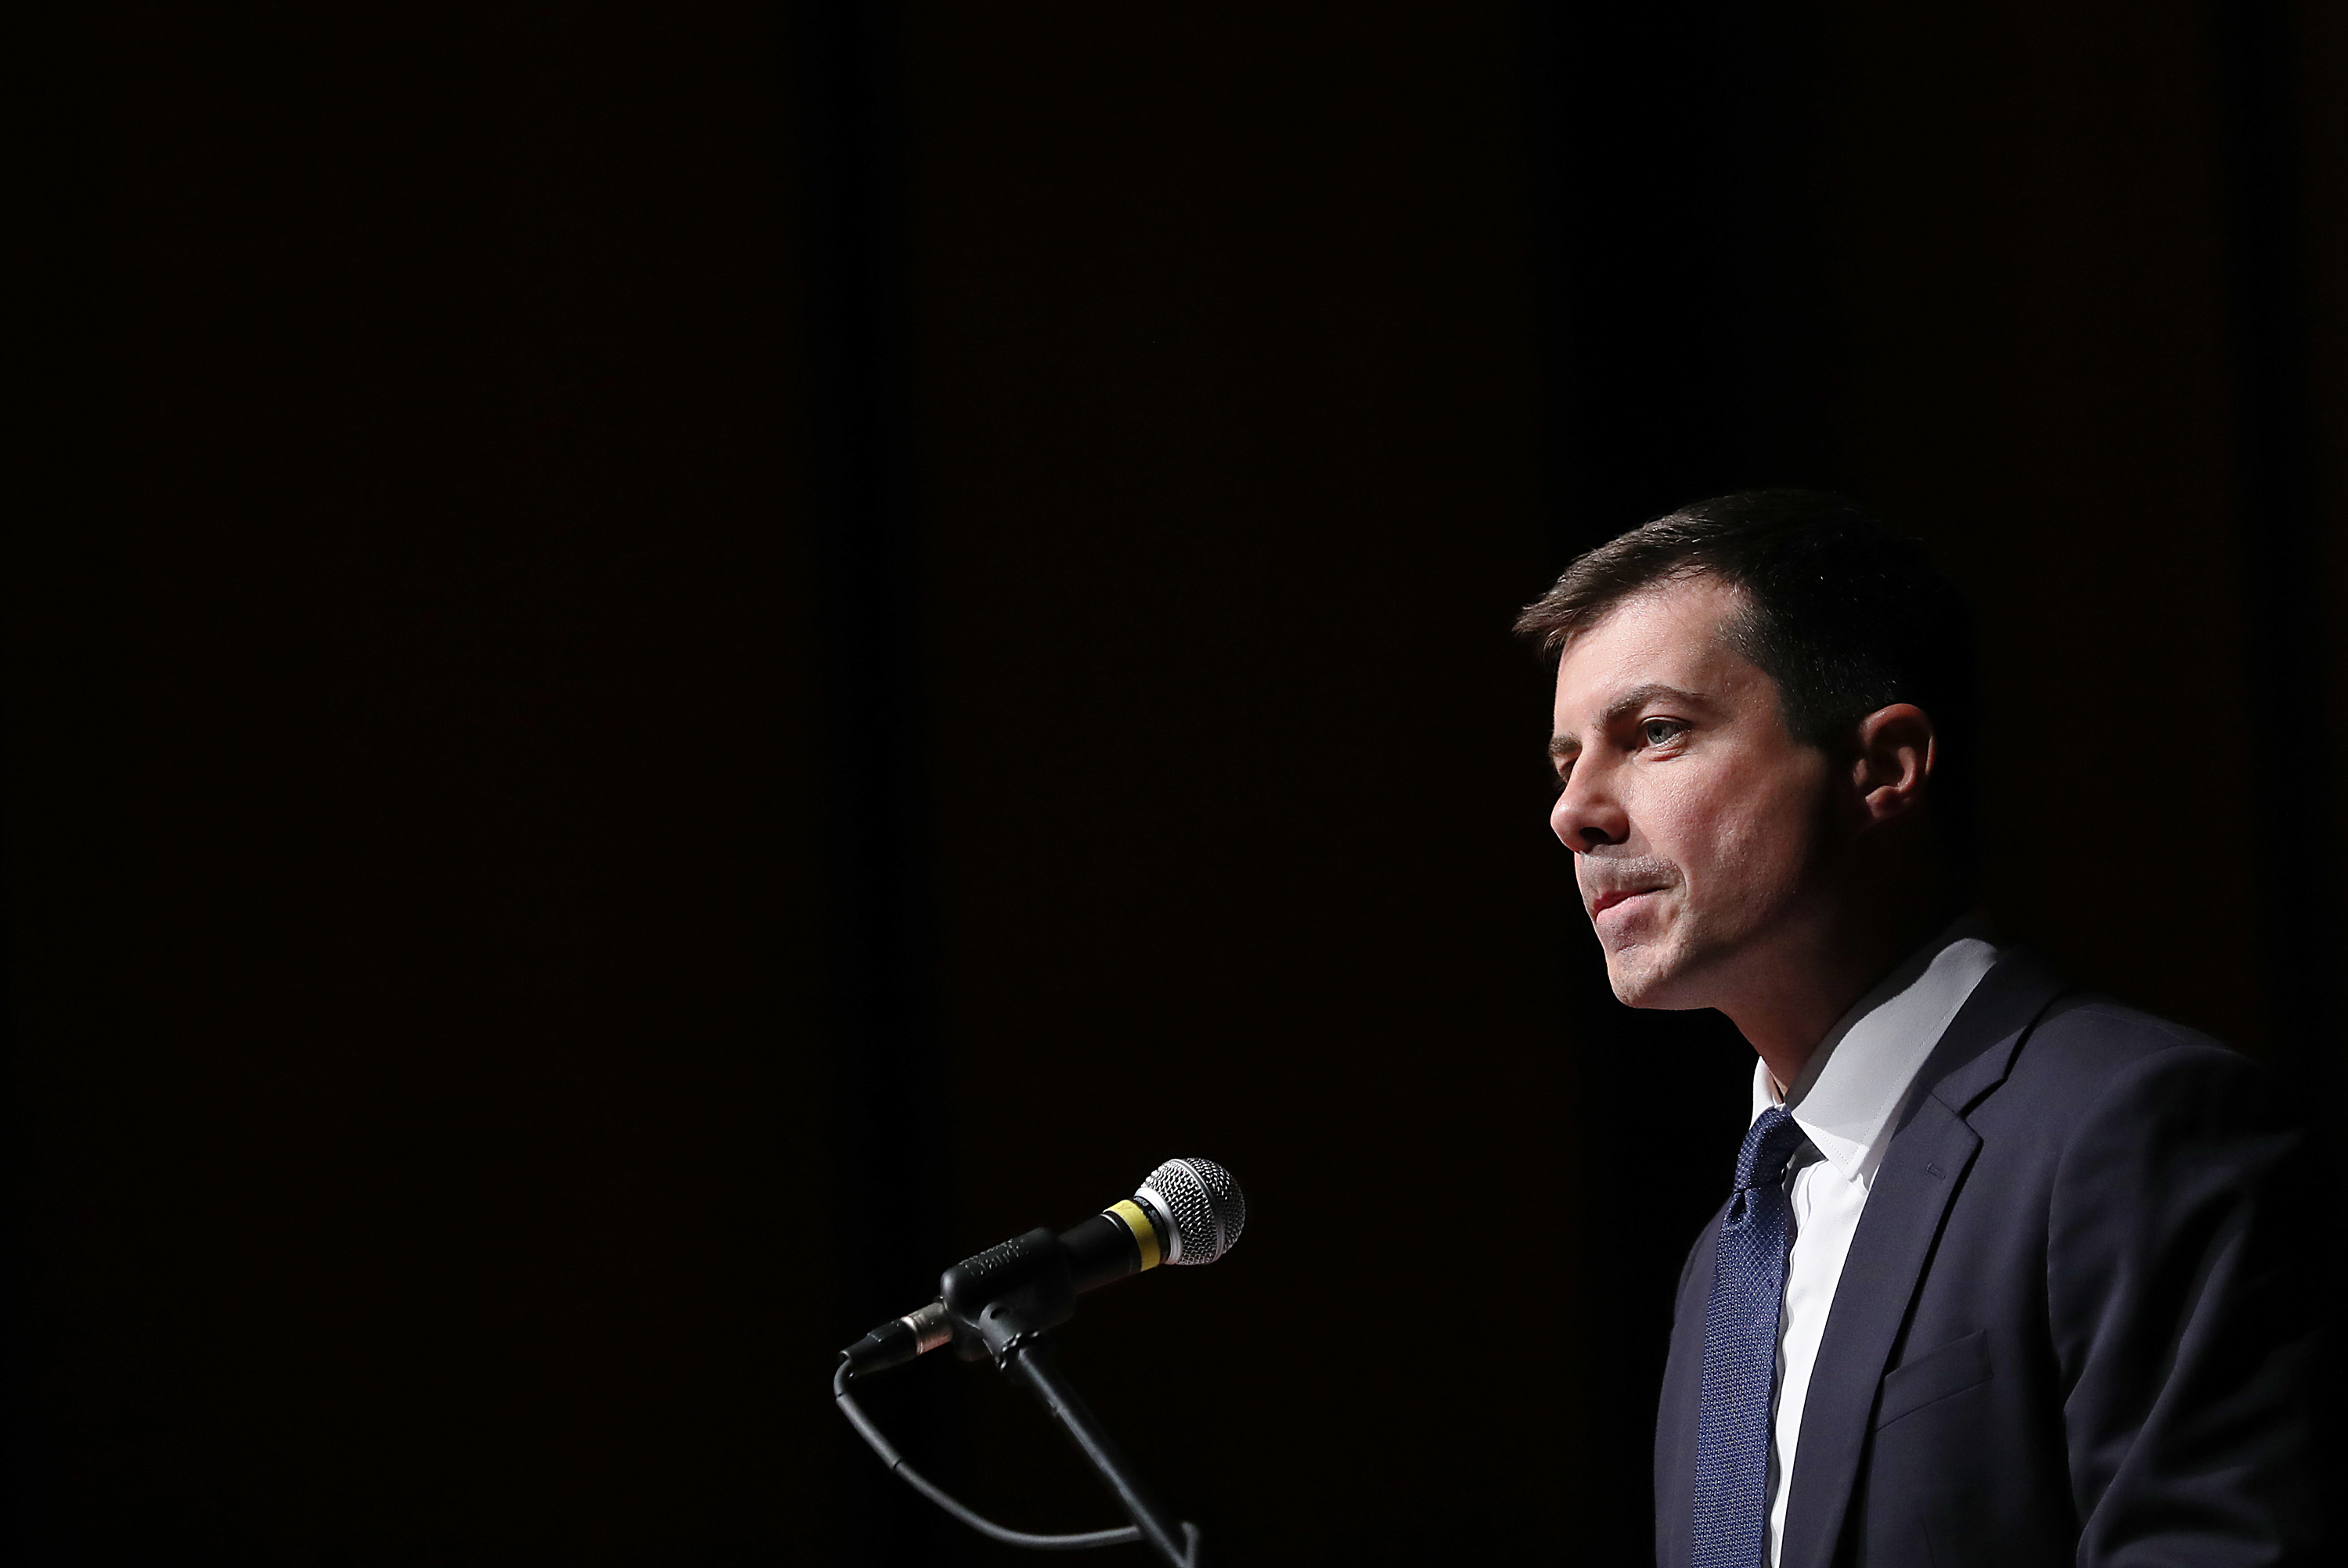 Presidential Candidate Pete Buttigieg Campaigns At Morehouse College In Atlanta